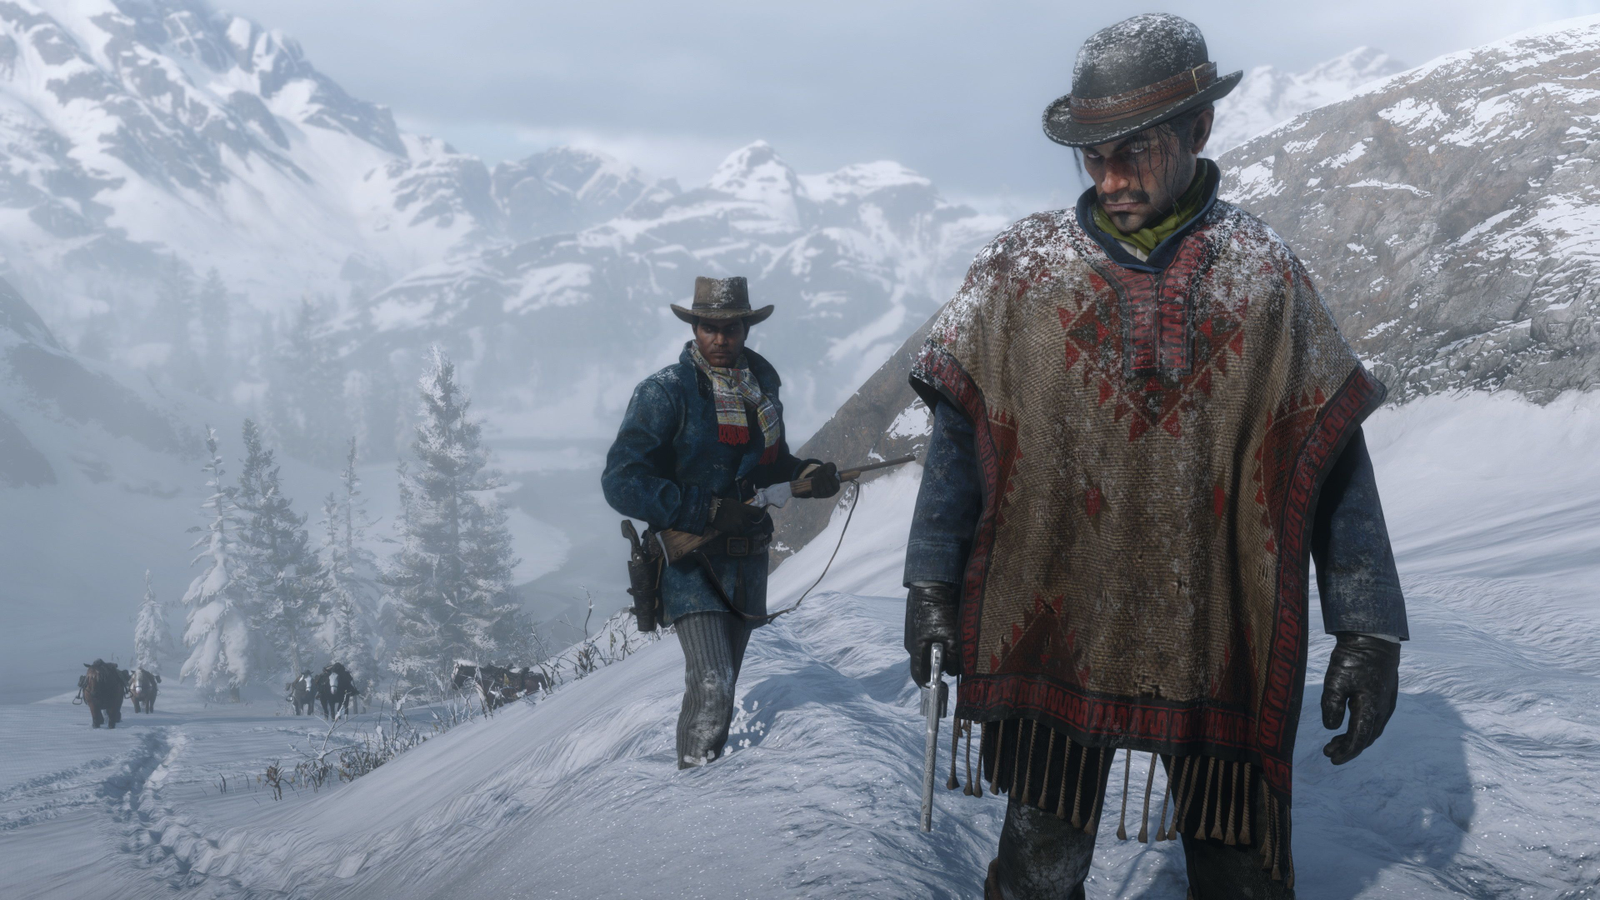 Red Dead Redemption 2 coming to PC on November 5